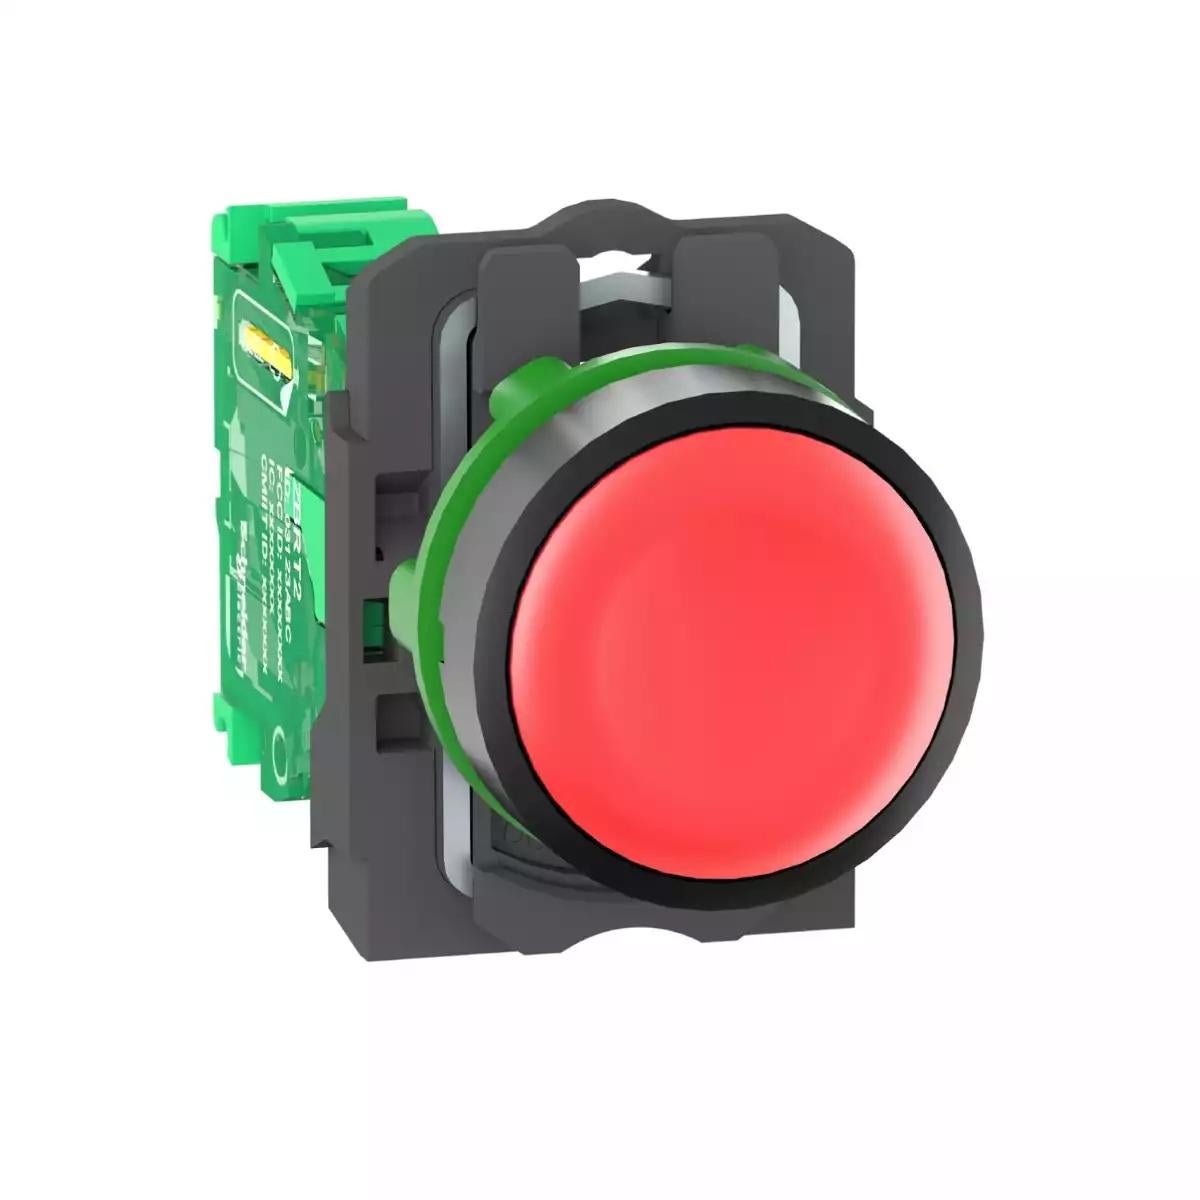 Wireless and batteryless transmitter, Harmony XB5R, push button, plastic, red, 22mm, spring return